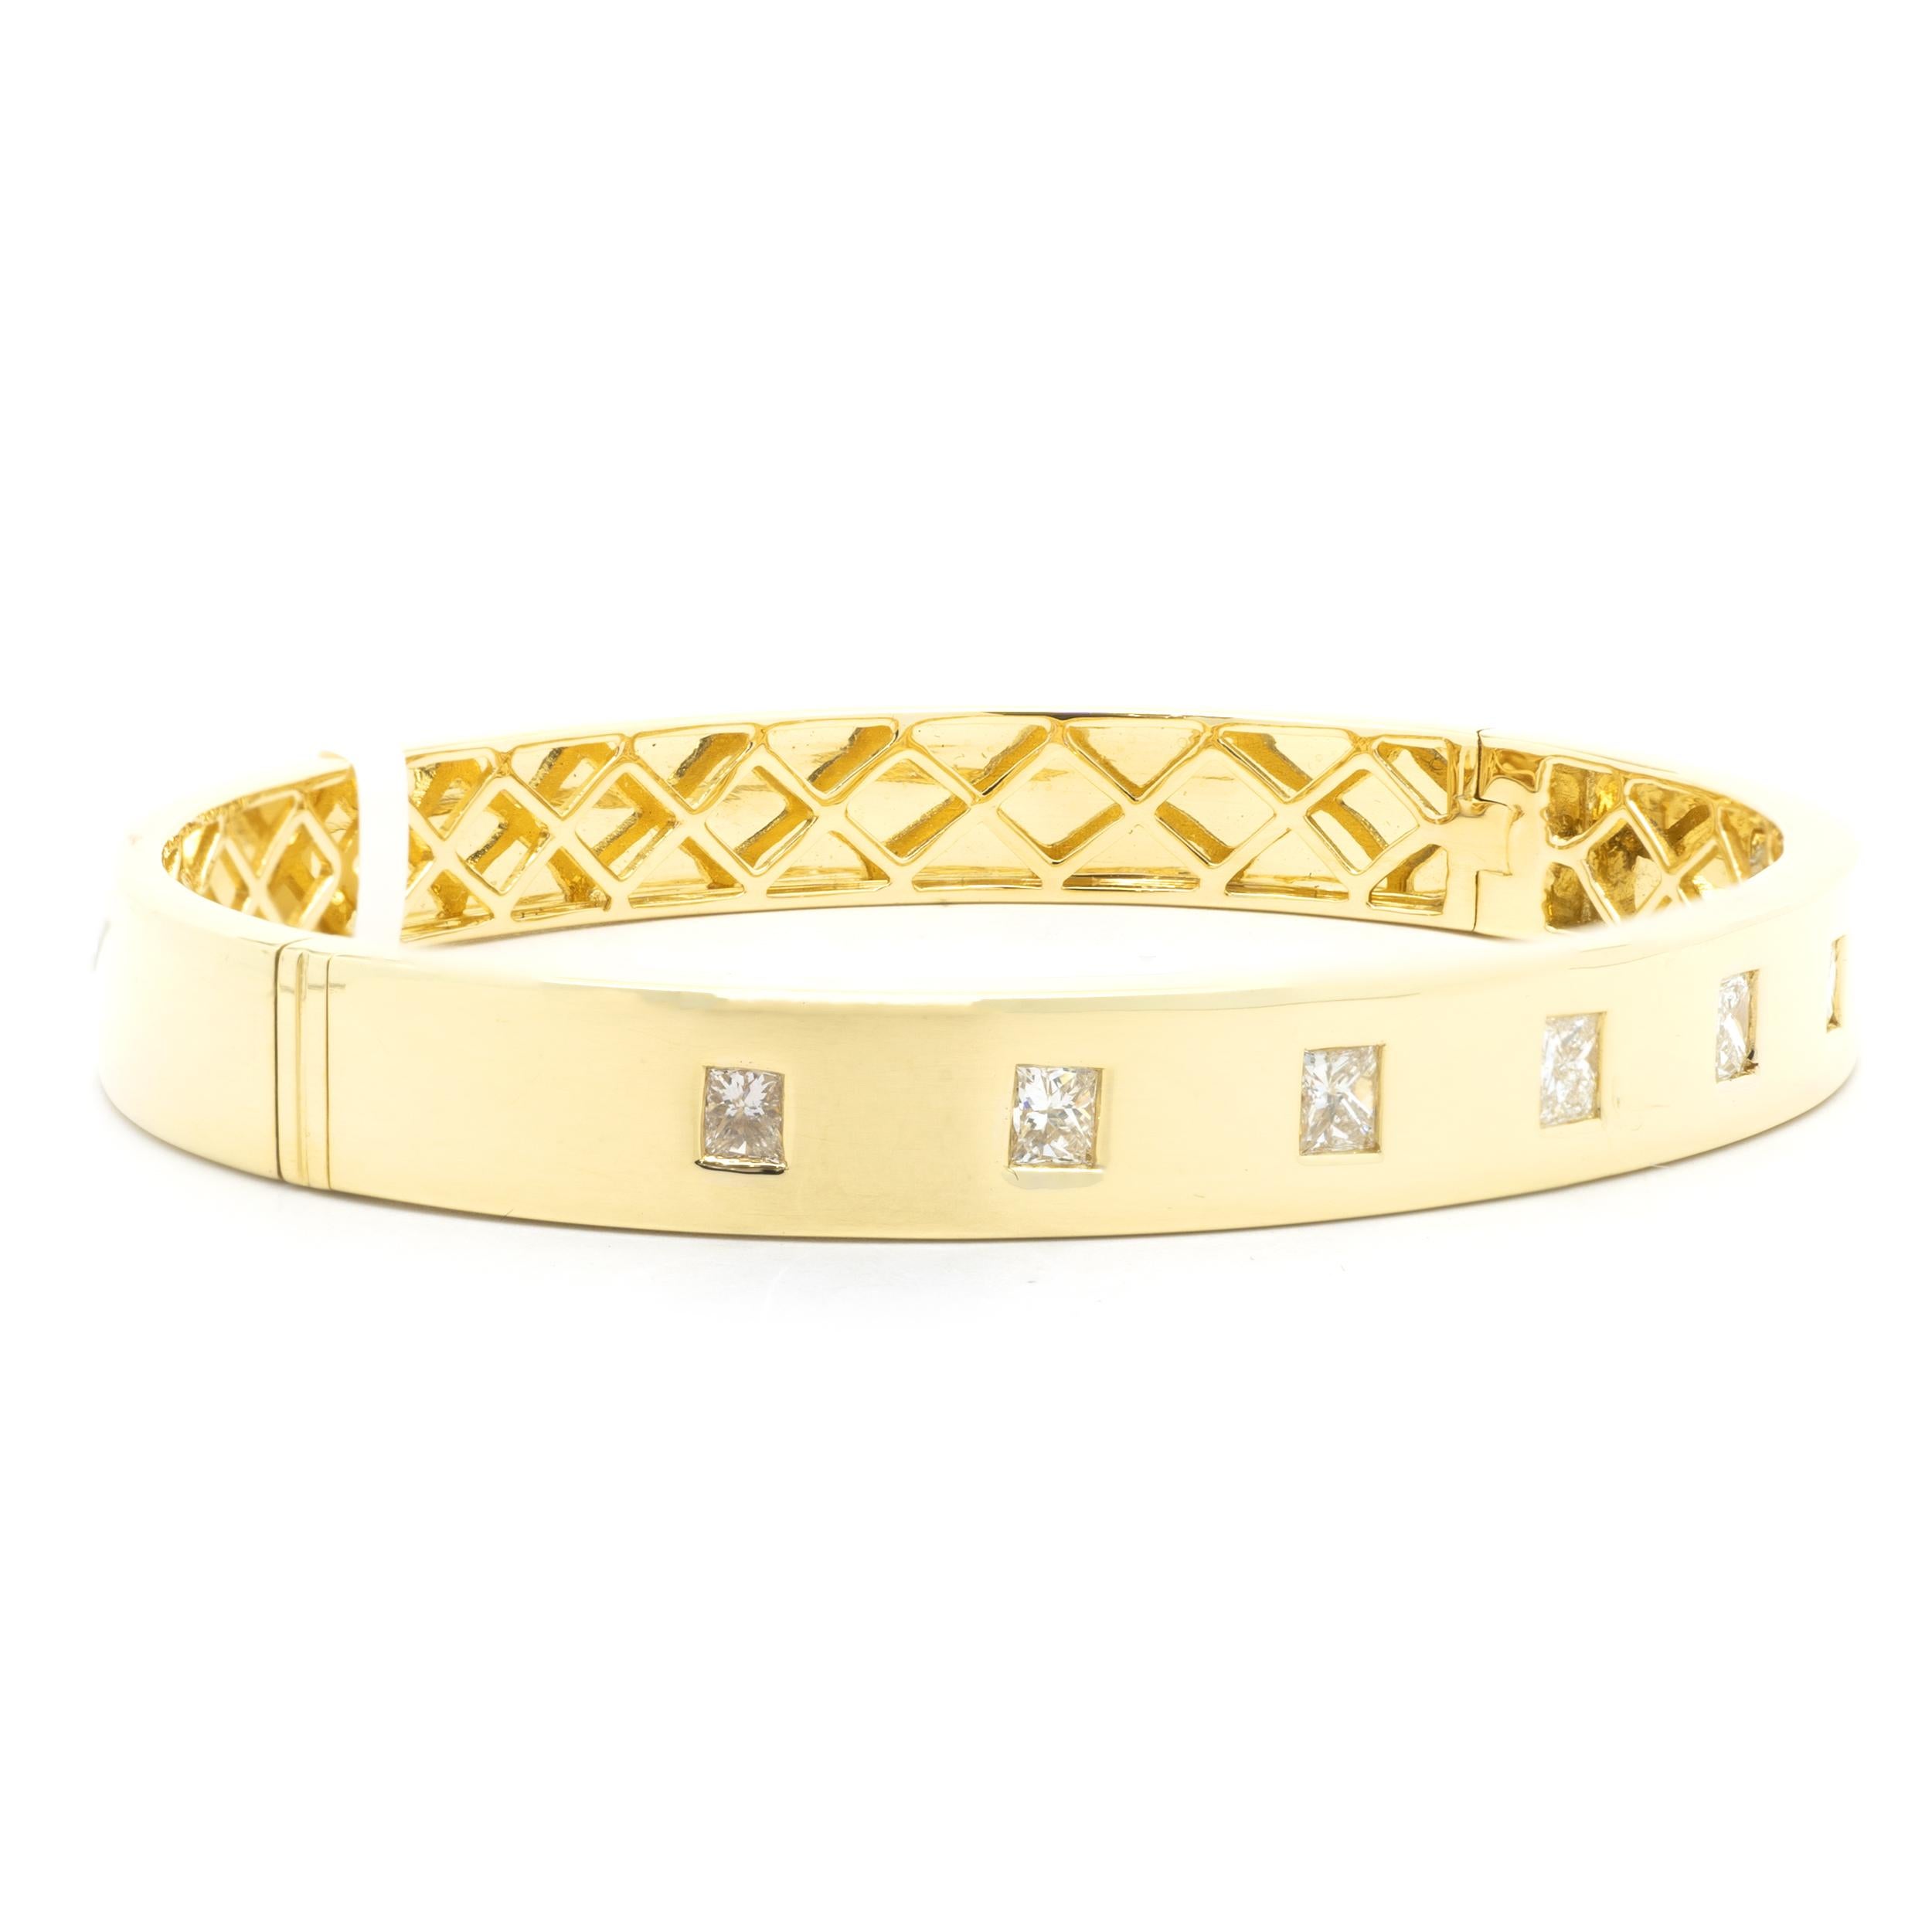 Designer: custom
Material: 18K yellow gold
Diamonds: 8 princess cut = 1.30cttw
Color: G
Clarity: VS2
Dimensions: bracelet will fit up to a 7-inch wrist
Weight: 20.18 grams
